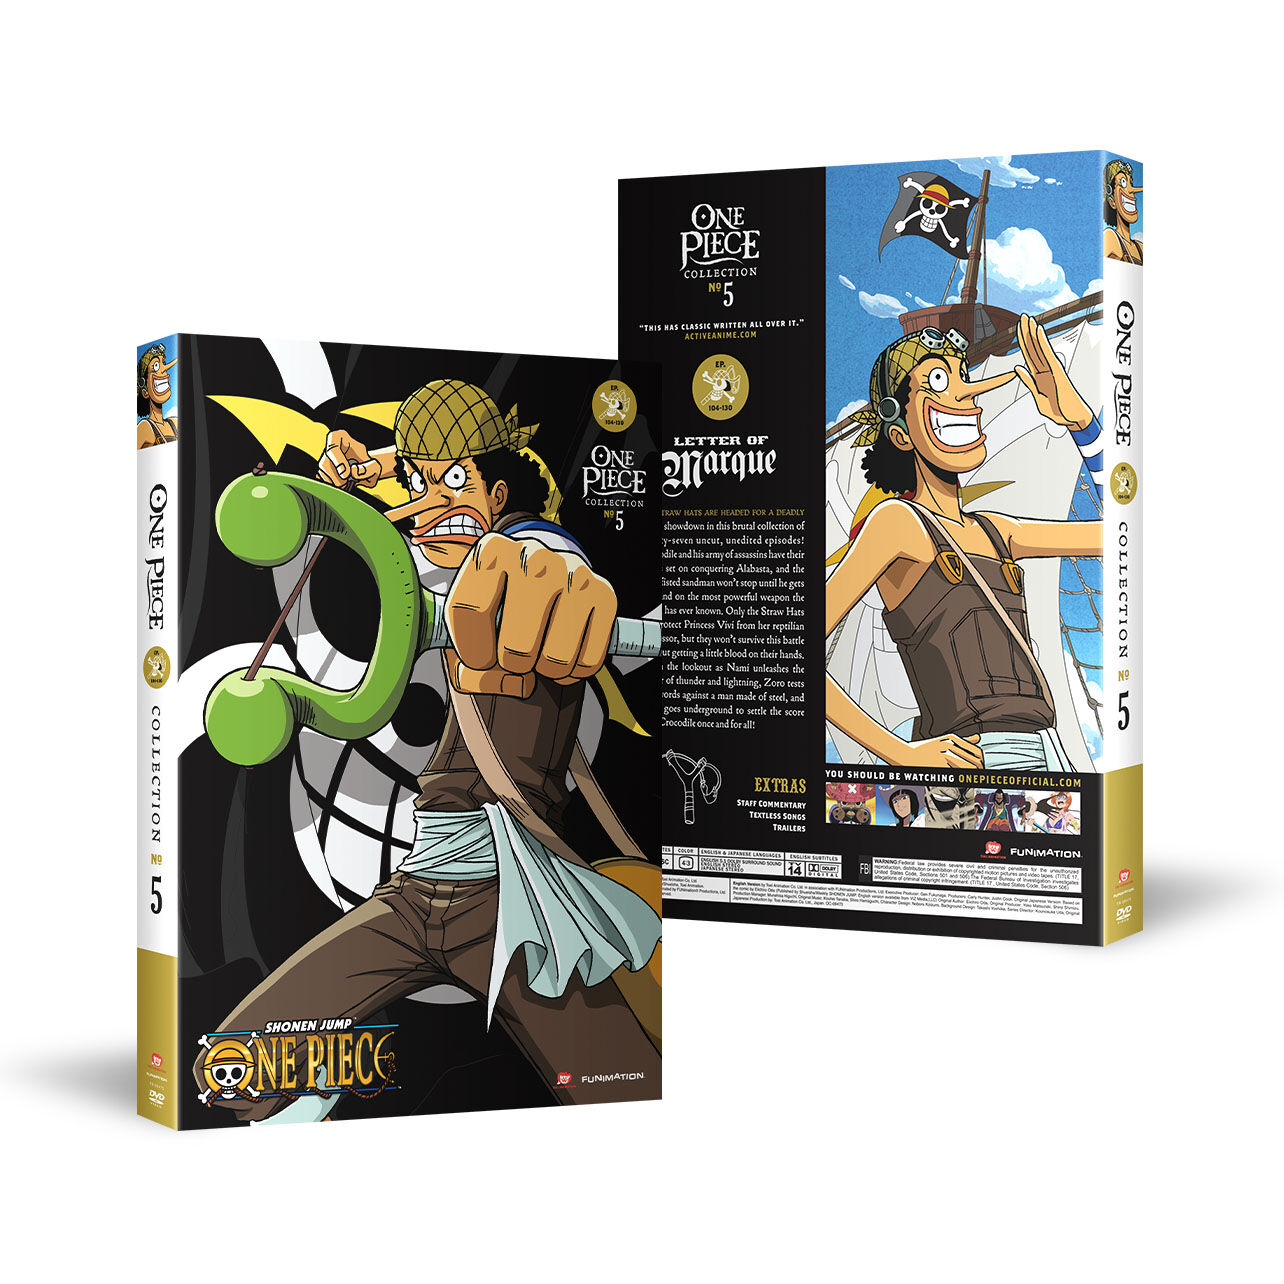 One Piece - Collection 5 - DVD | Crunchyroll Store